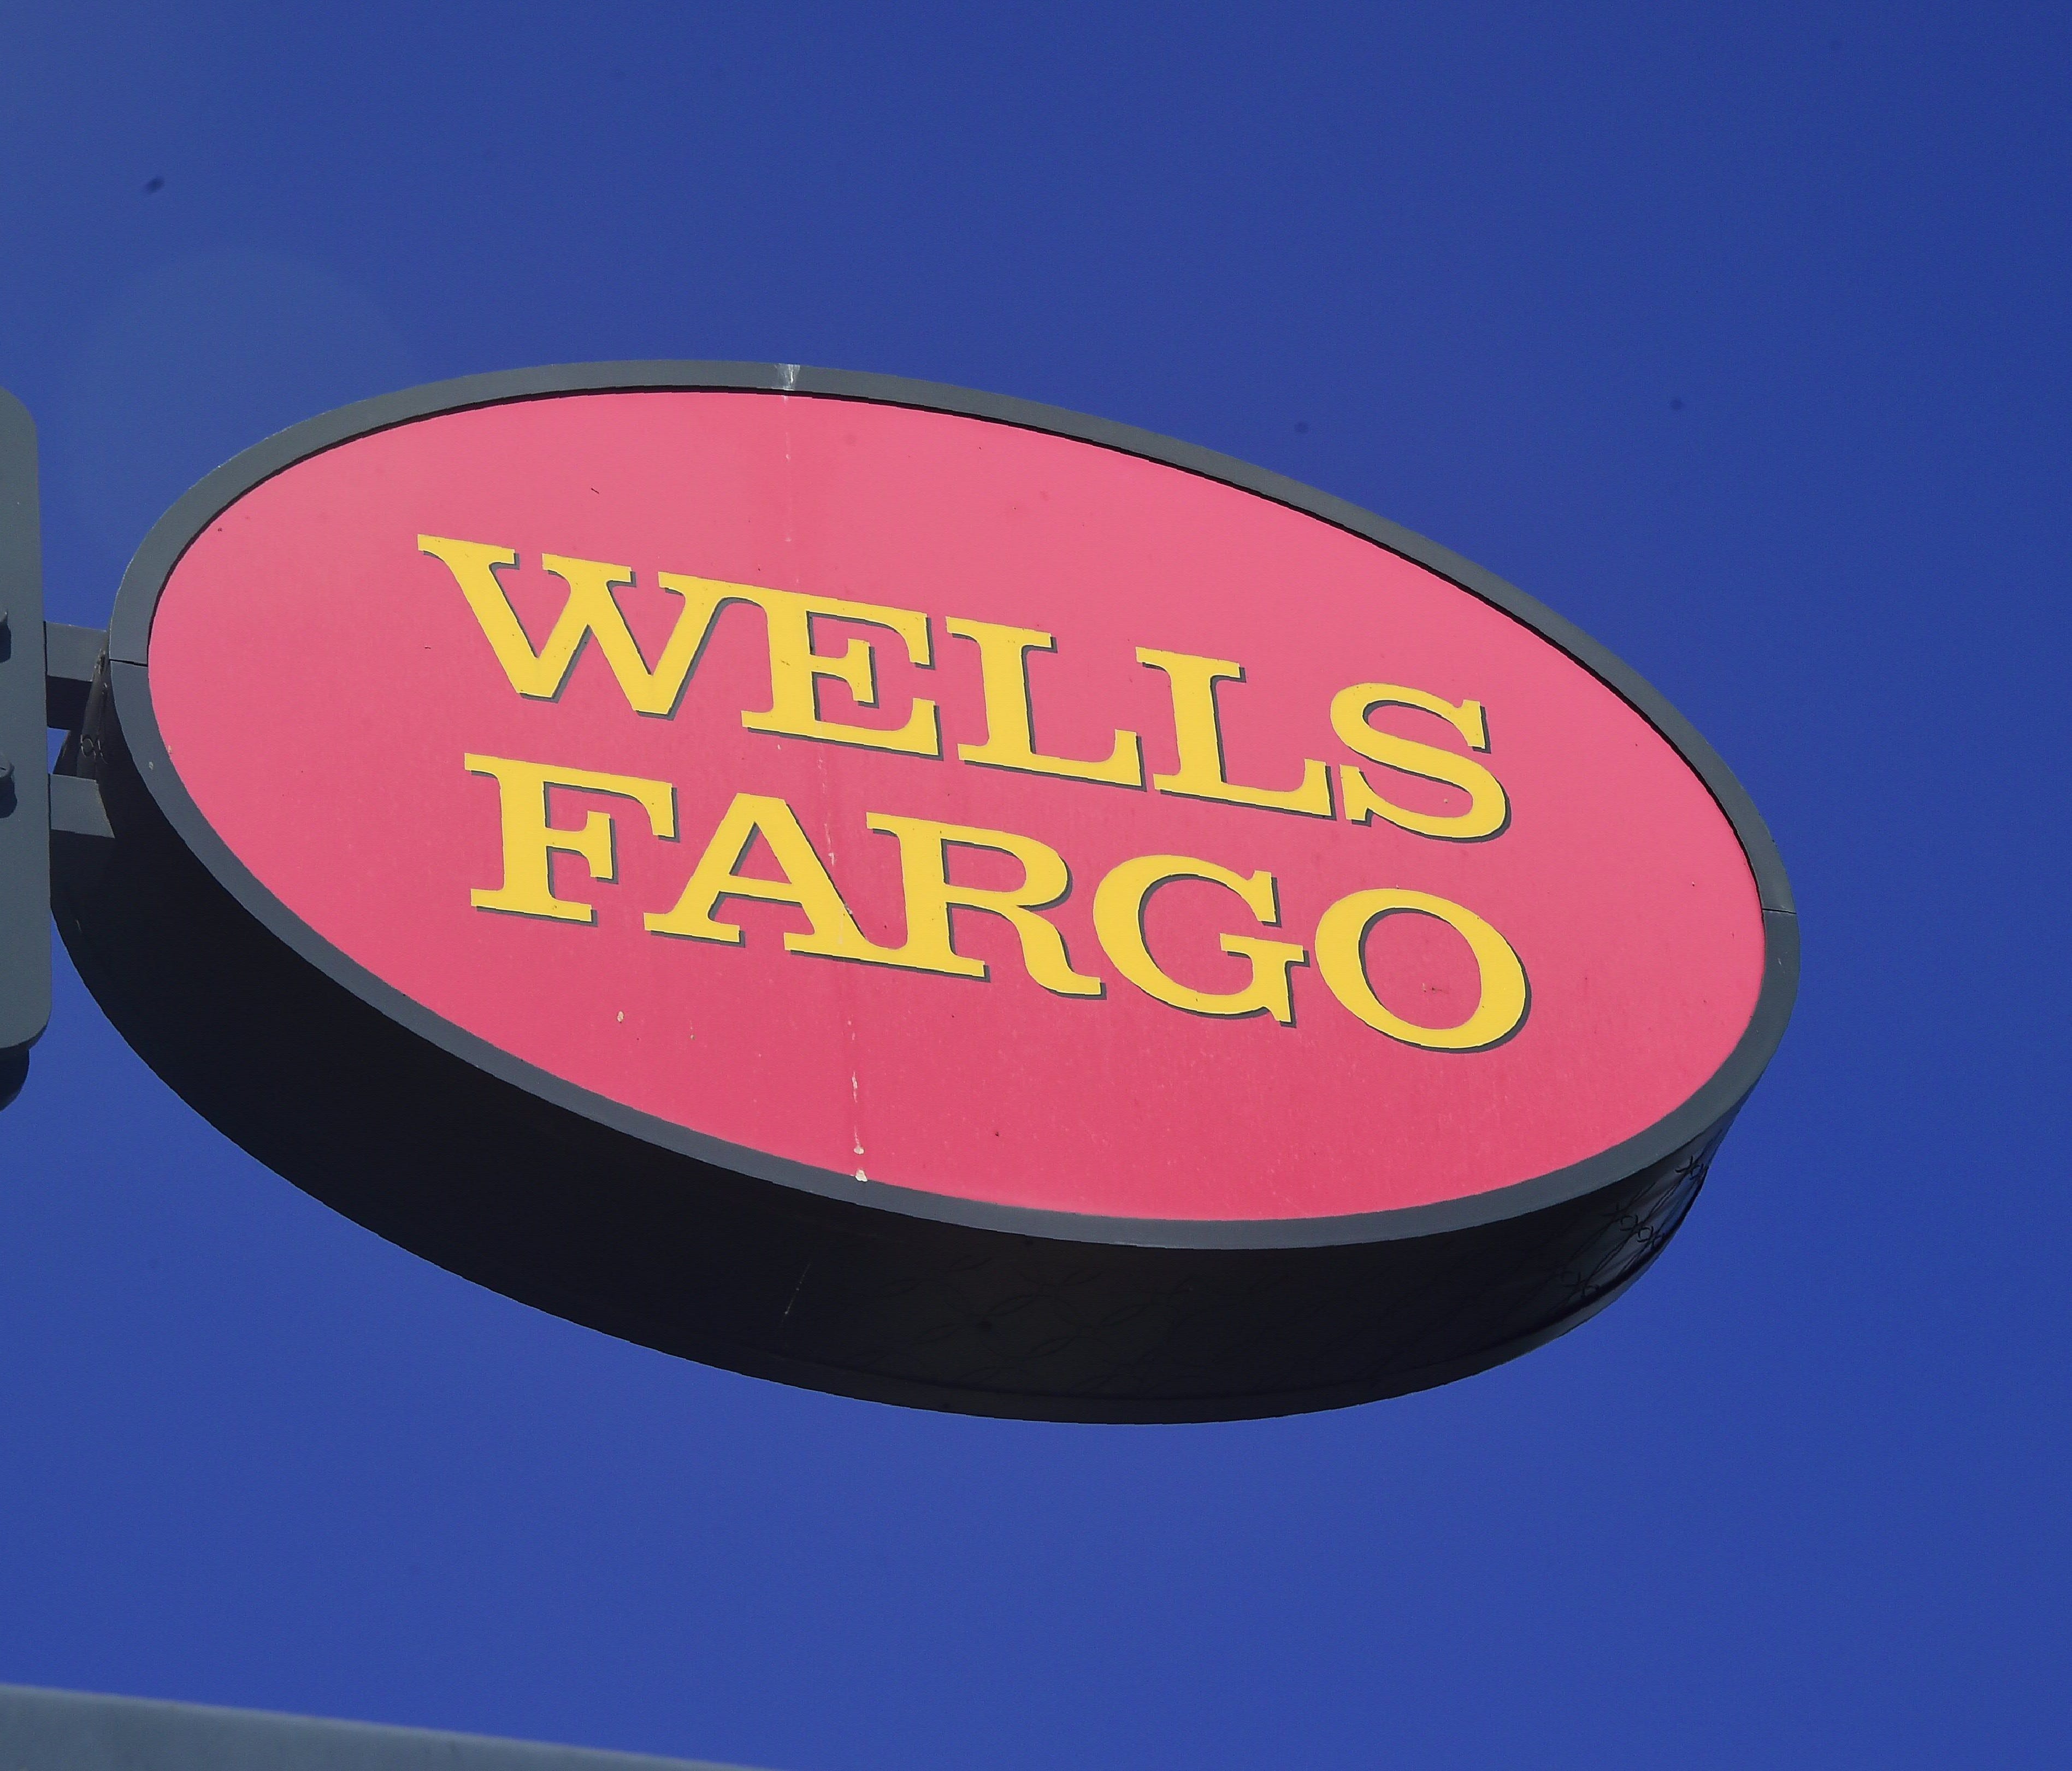 File photo taken in 2016 shows a Wells Fargo sign  in front of one of the bank's branches in Pasadena, California.